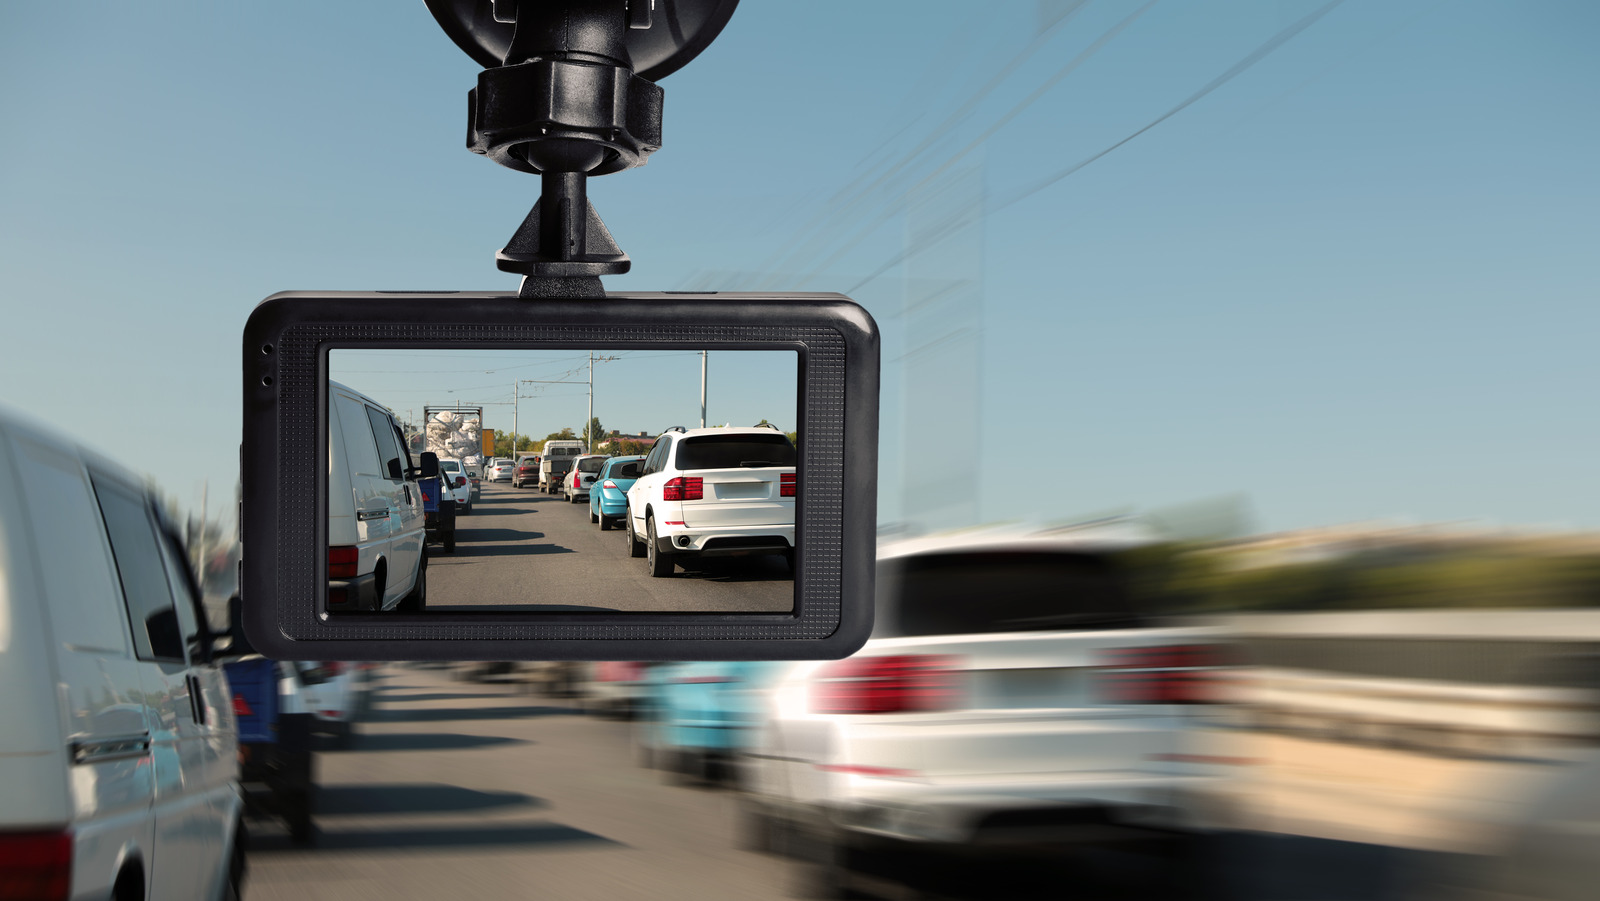 https://www.slashgear.com/img/gallery/protecting-yourself-on-the-road-why-a-dashcam-is-a-must-have-upgrade-for-your-car/l-intro-1702149298.jpg